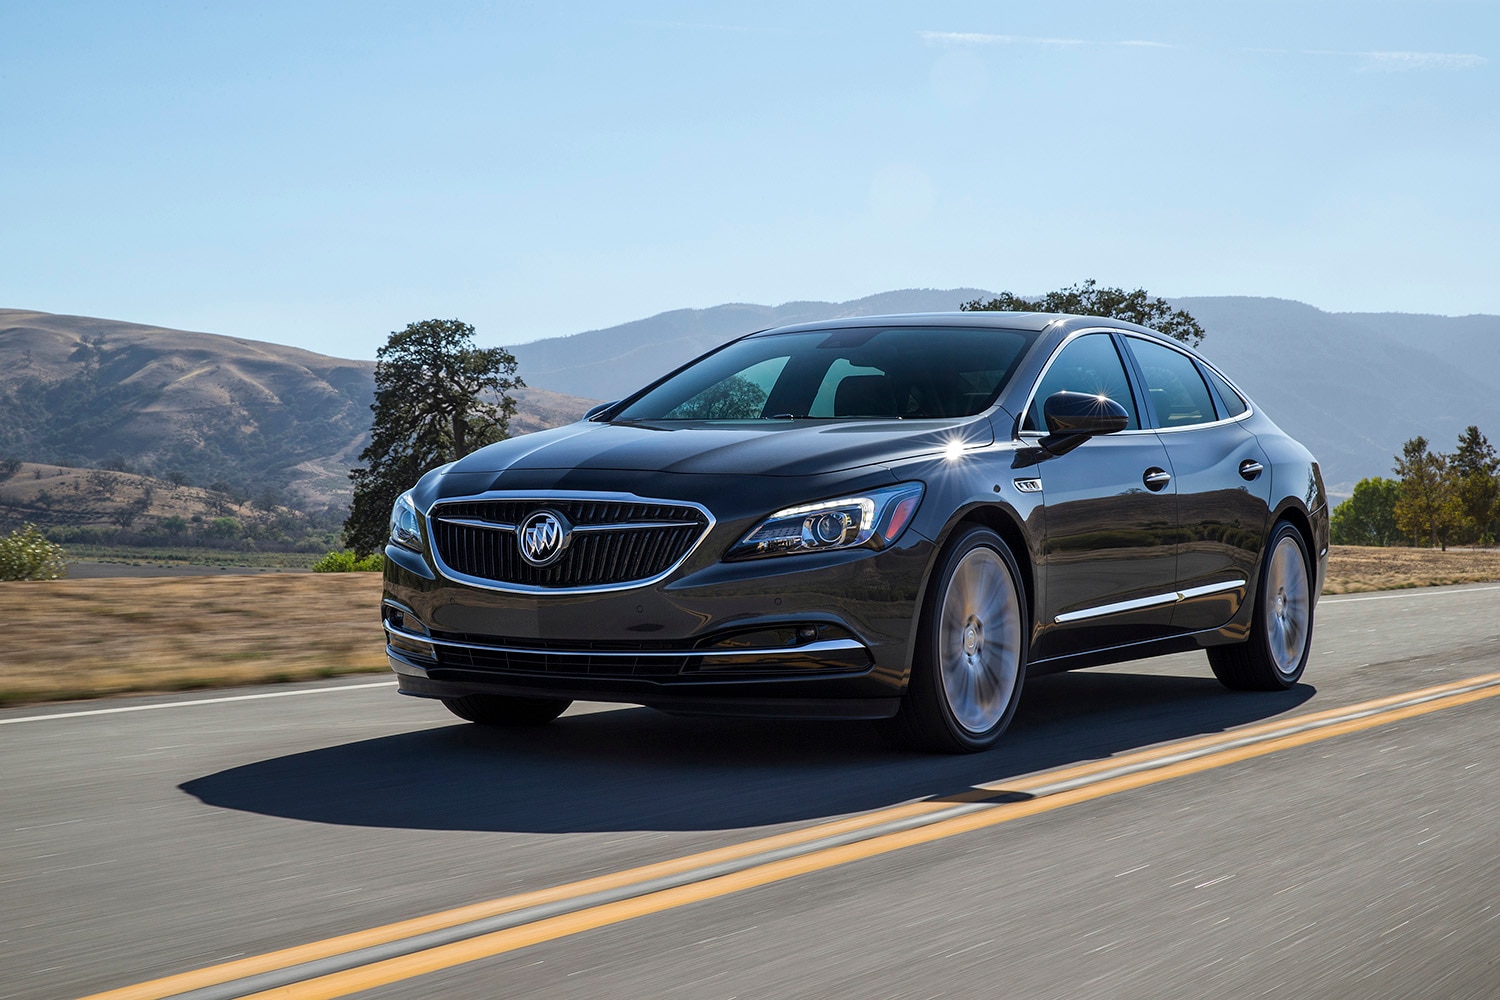 2018 Buick LaCrosse: One of Capital One's 10 Best Road Trip Vehicles, According to Science